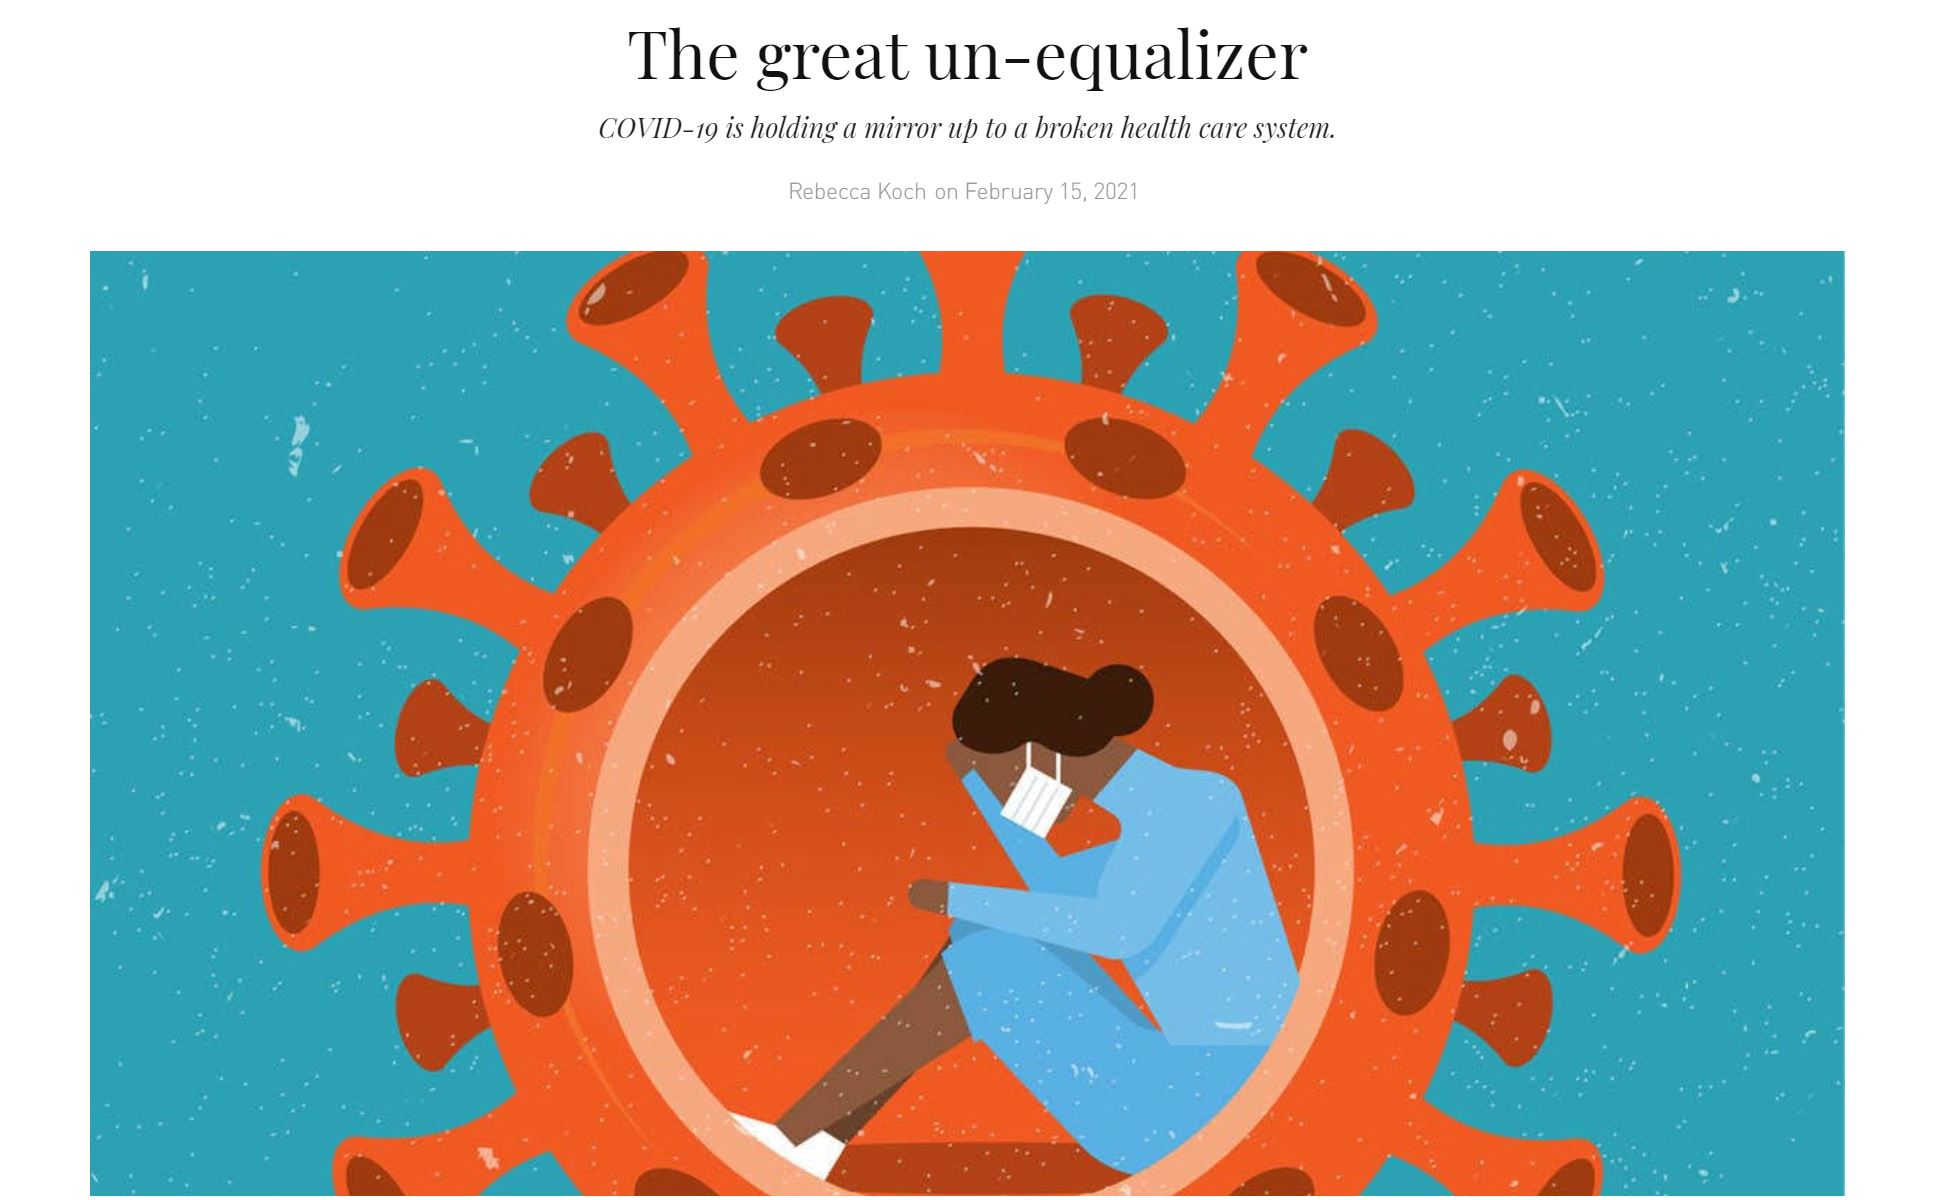 The great un-equalizer